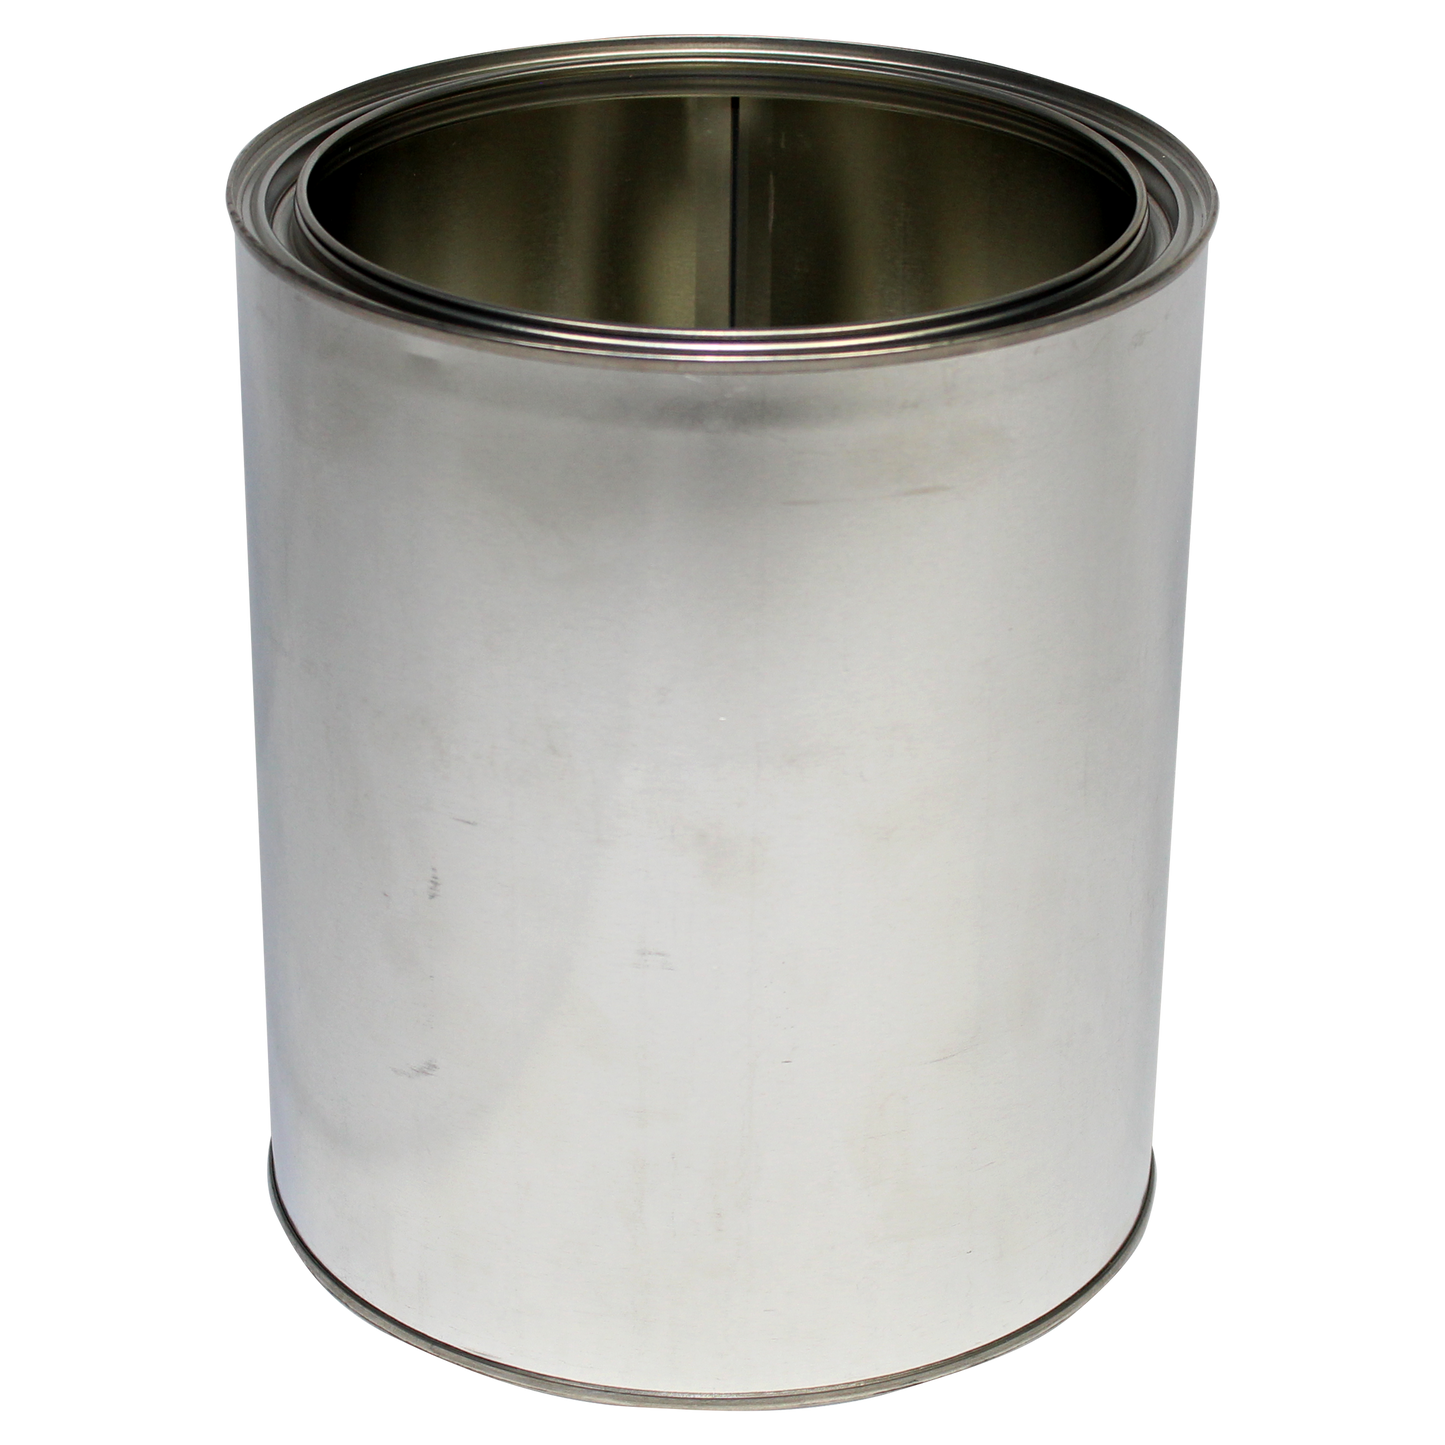 1-Gallon (US) Unlined Steel Paint Can, with Welded Seams - (IP3-1G)